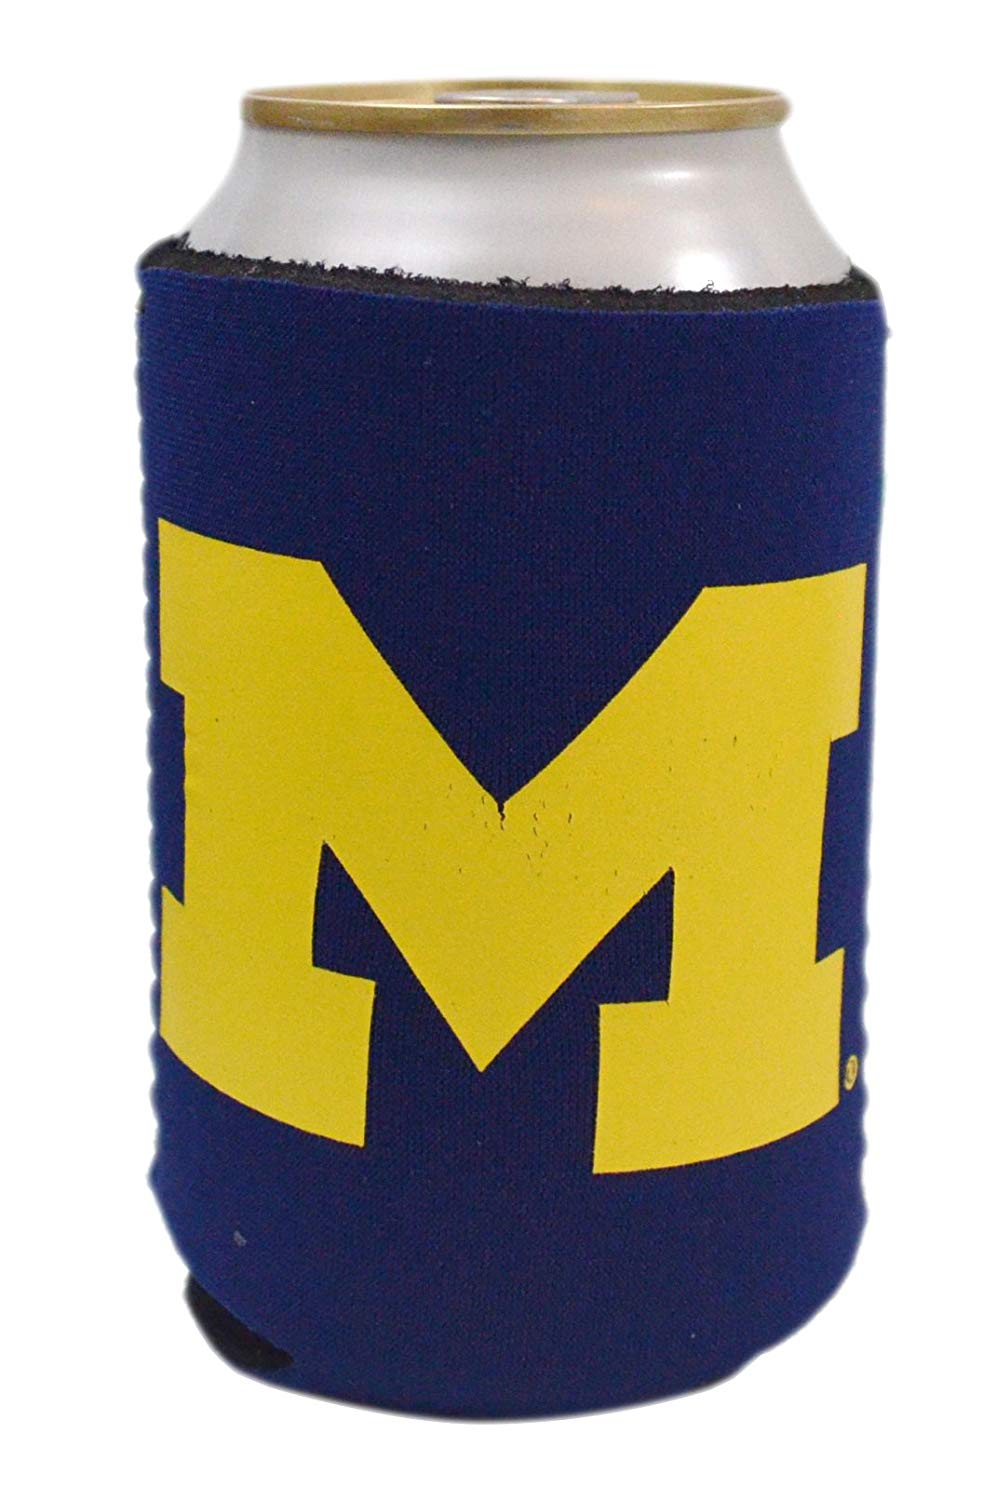 NCAA Fan Shop Authentic 2-Pack Insulated 12 Oz Can Cooler. Show School Pride At Home, Tailgating or At a Game. Great for Students, Alumni or Fans.